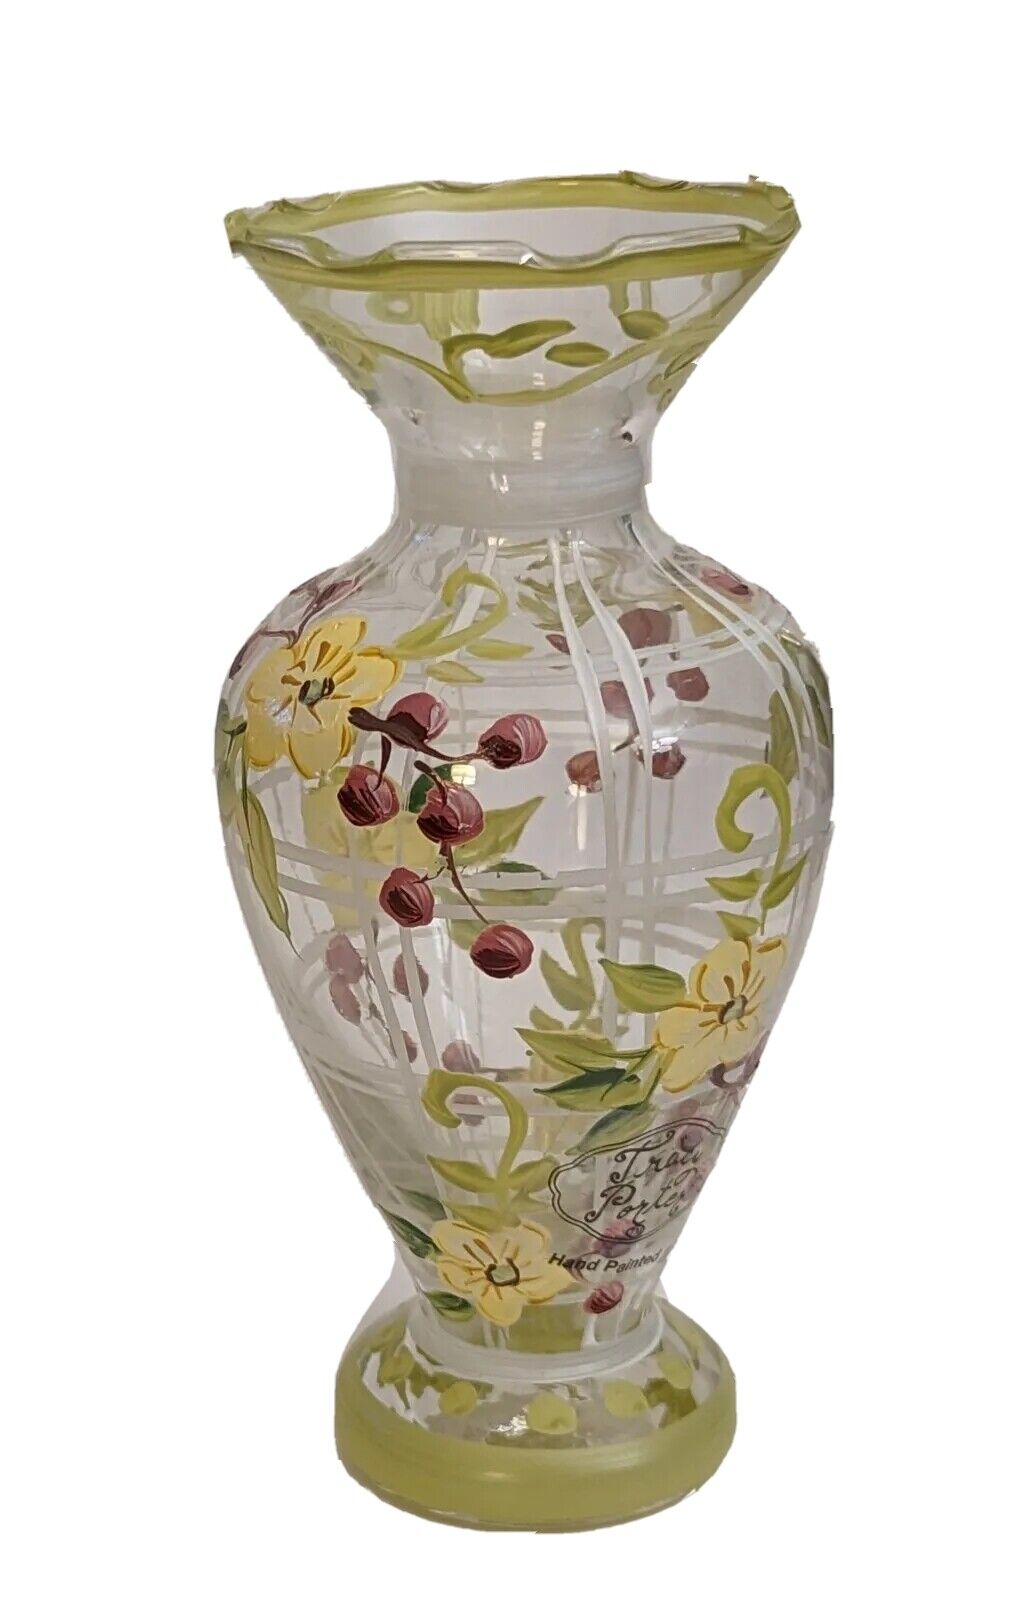 Tracey Porter Hand Painted Glass Bud Vase Floral w Berries Yellow Green White